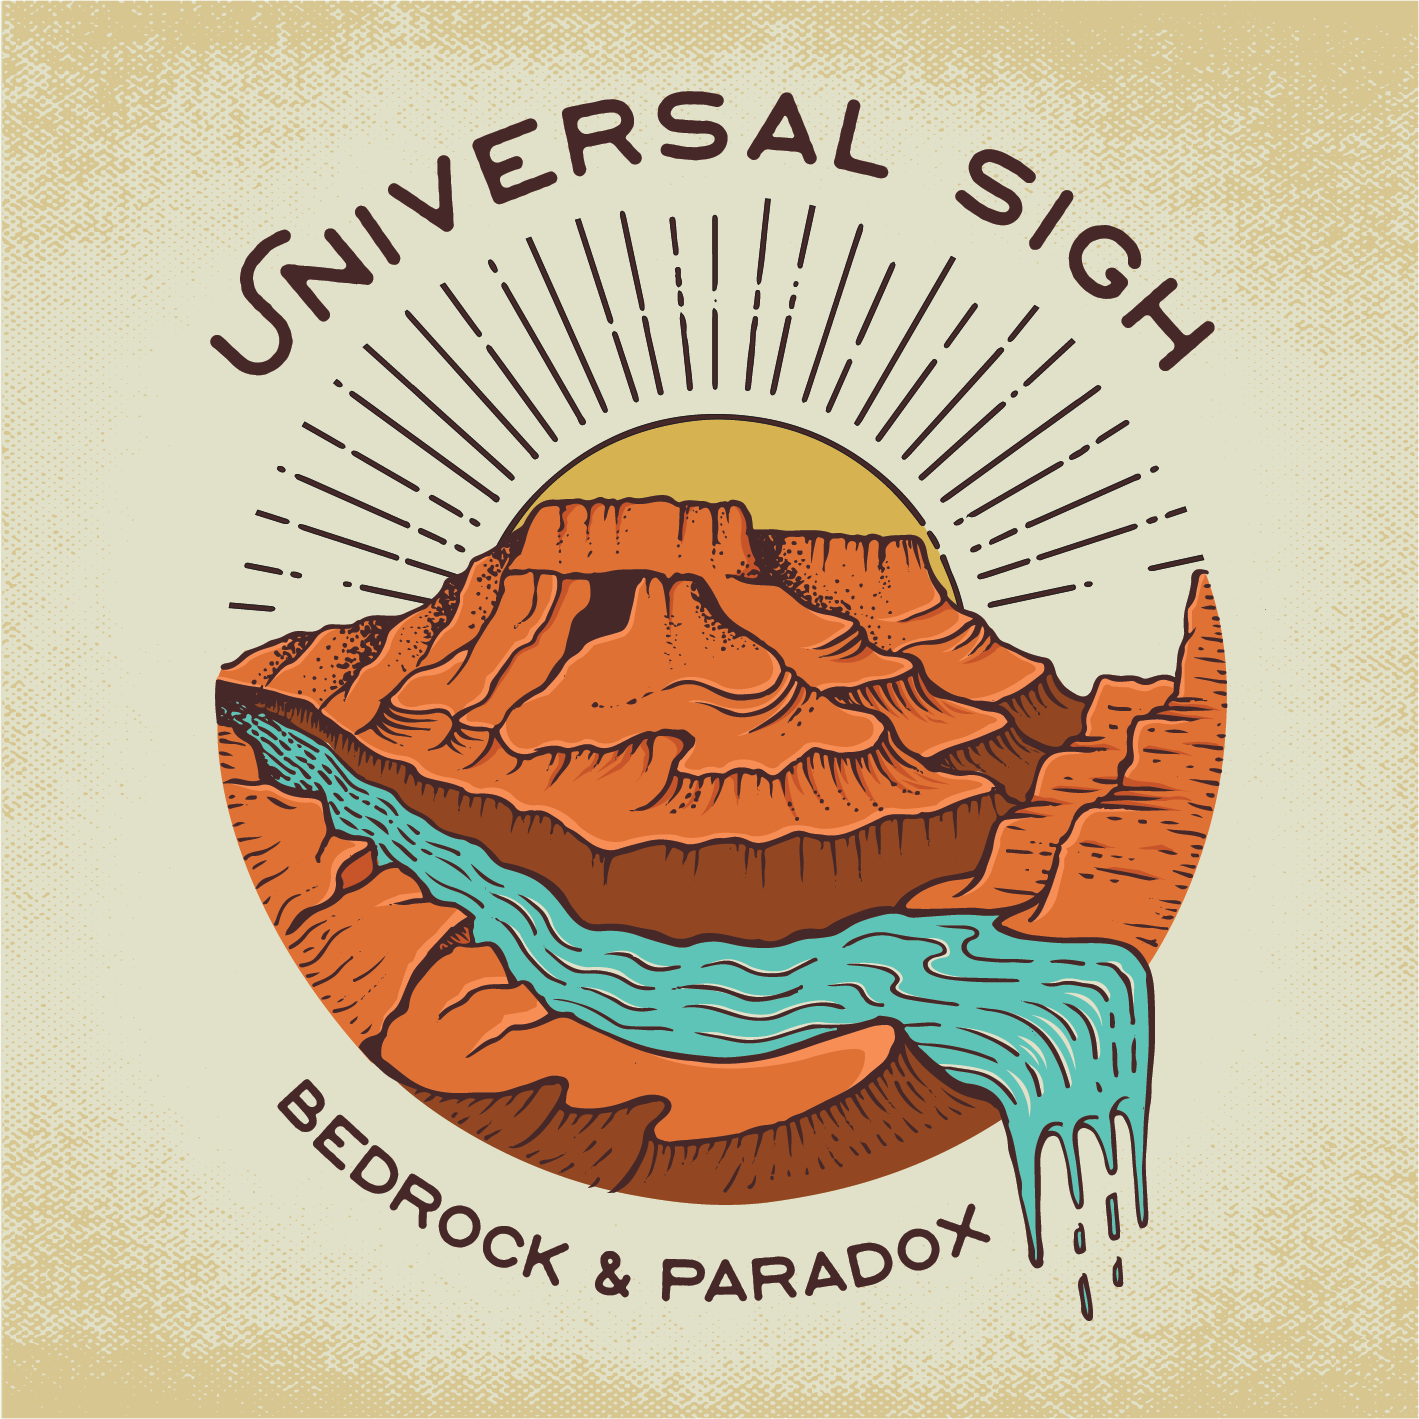 Universal Sigh releases new single ‘Bedrock & Paradox’